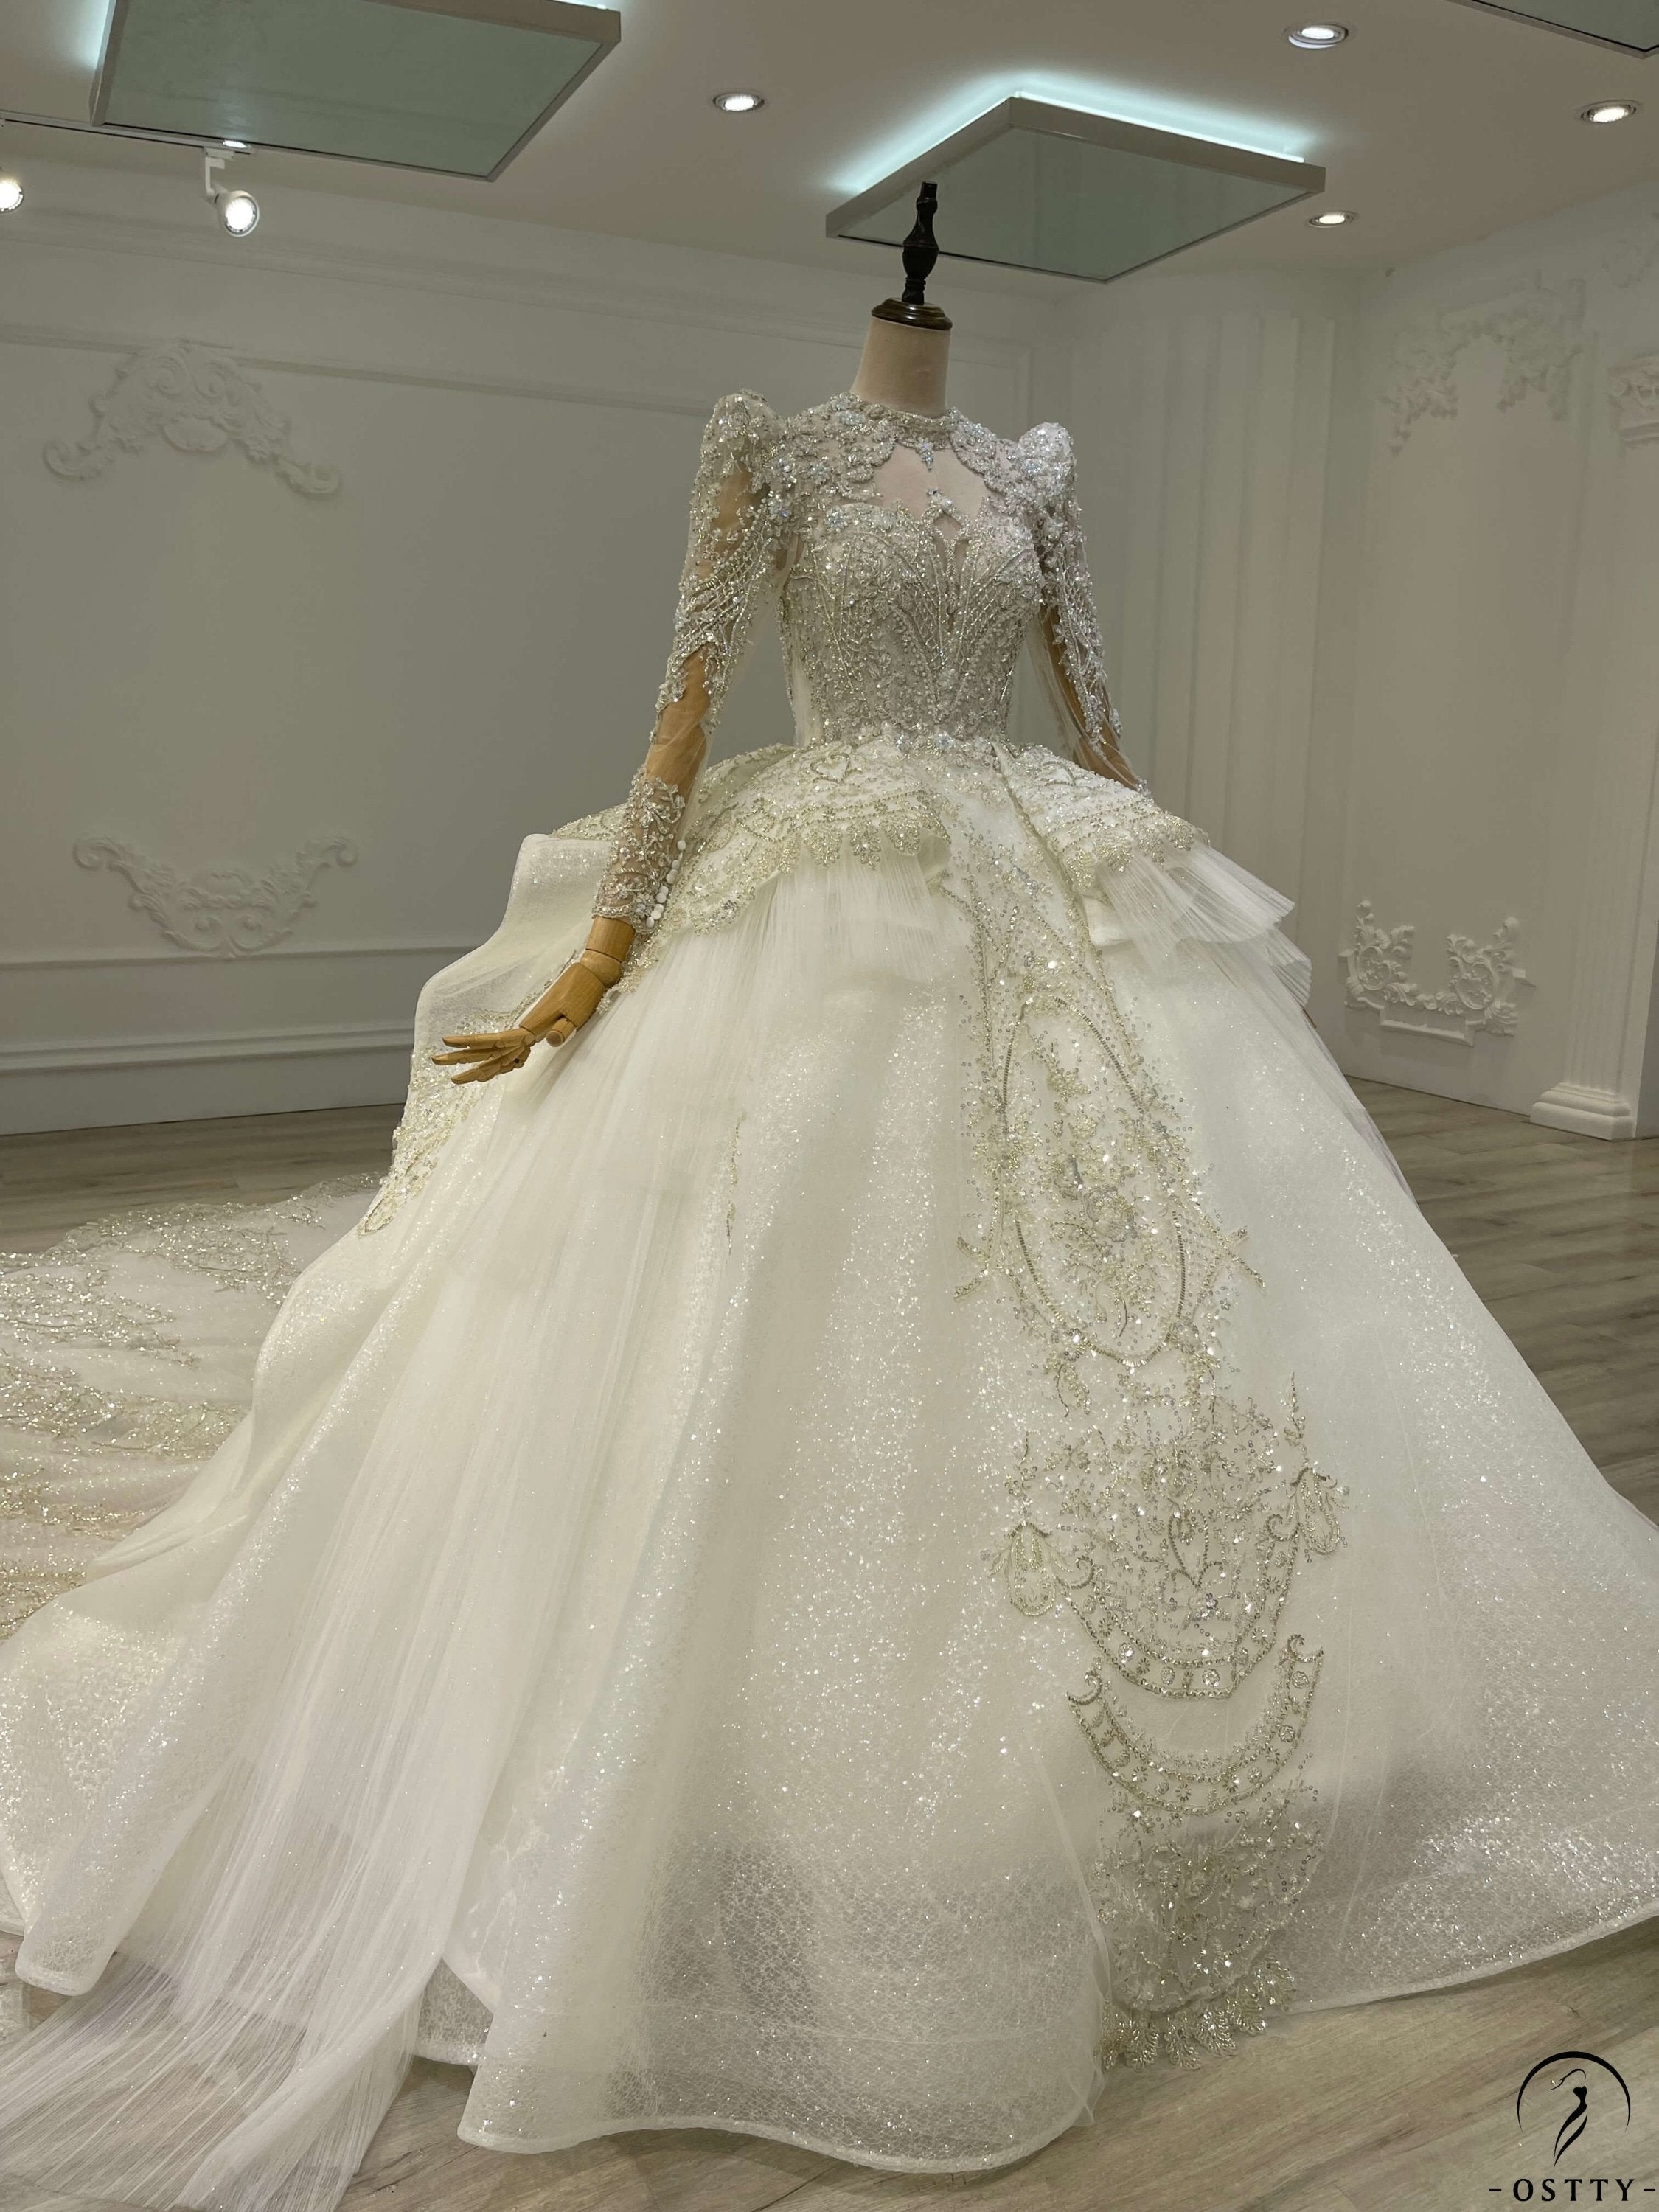 White Luxury Long Sleeve Wedding Dress With Train Pearl Sequins Lace High Waist Ball Gown OSA081901 - $1,499.99